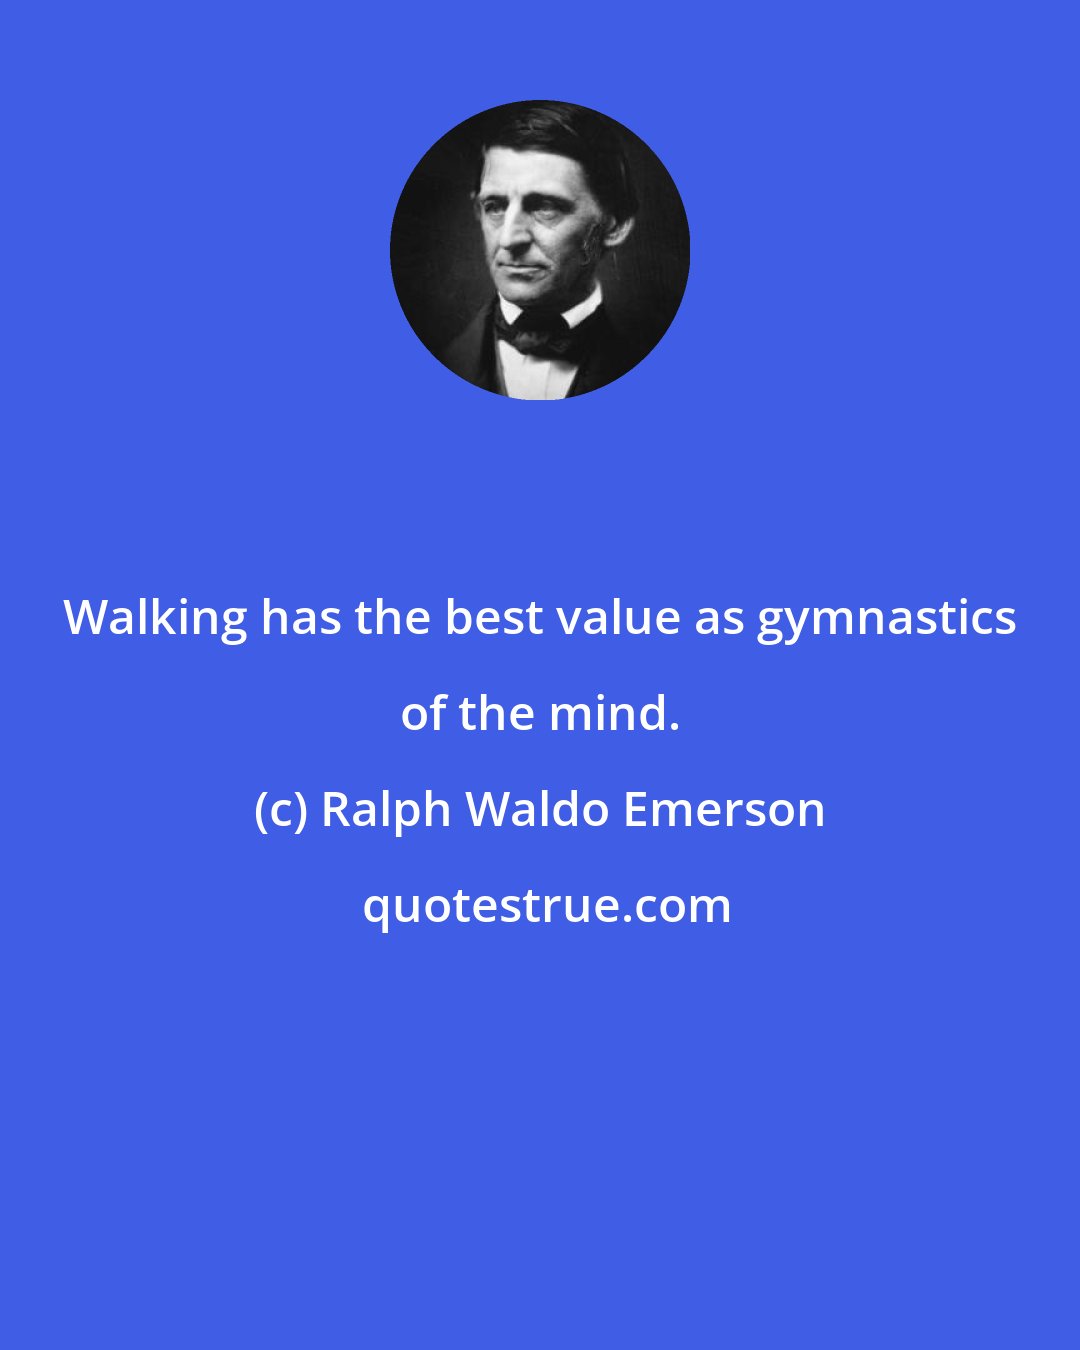 Ralph Waldo Emerson: Walking has the best value as gymnastics of the mind.